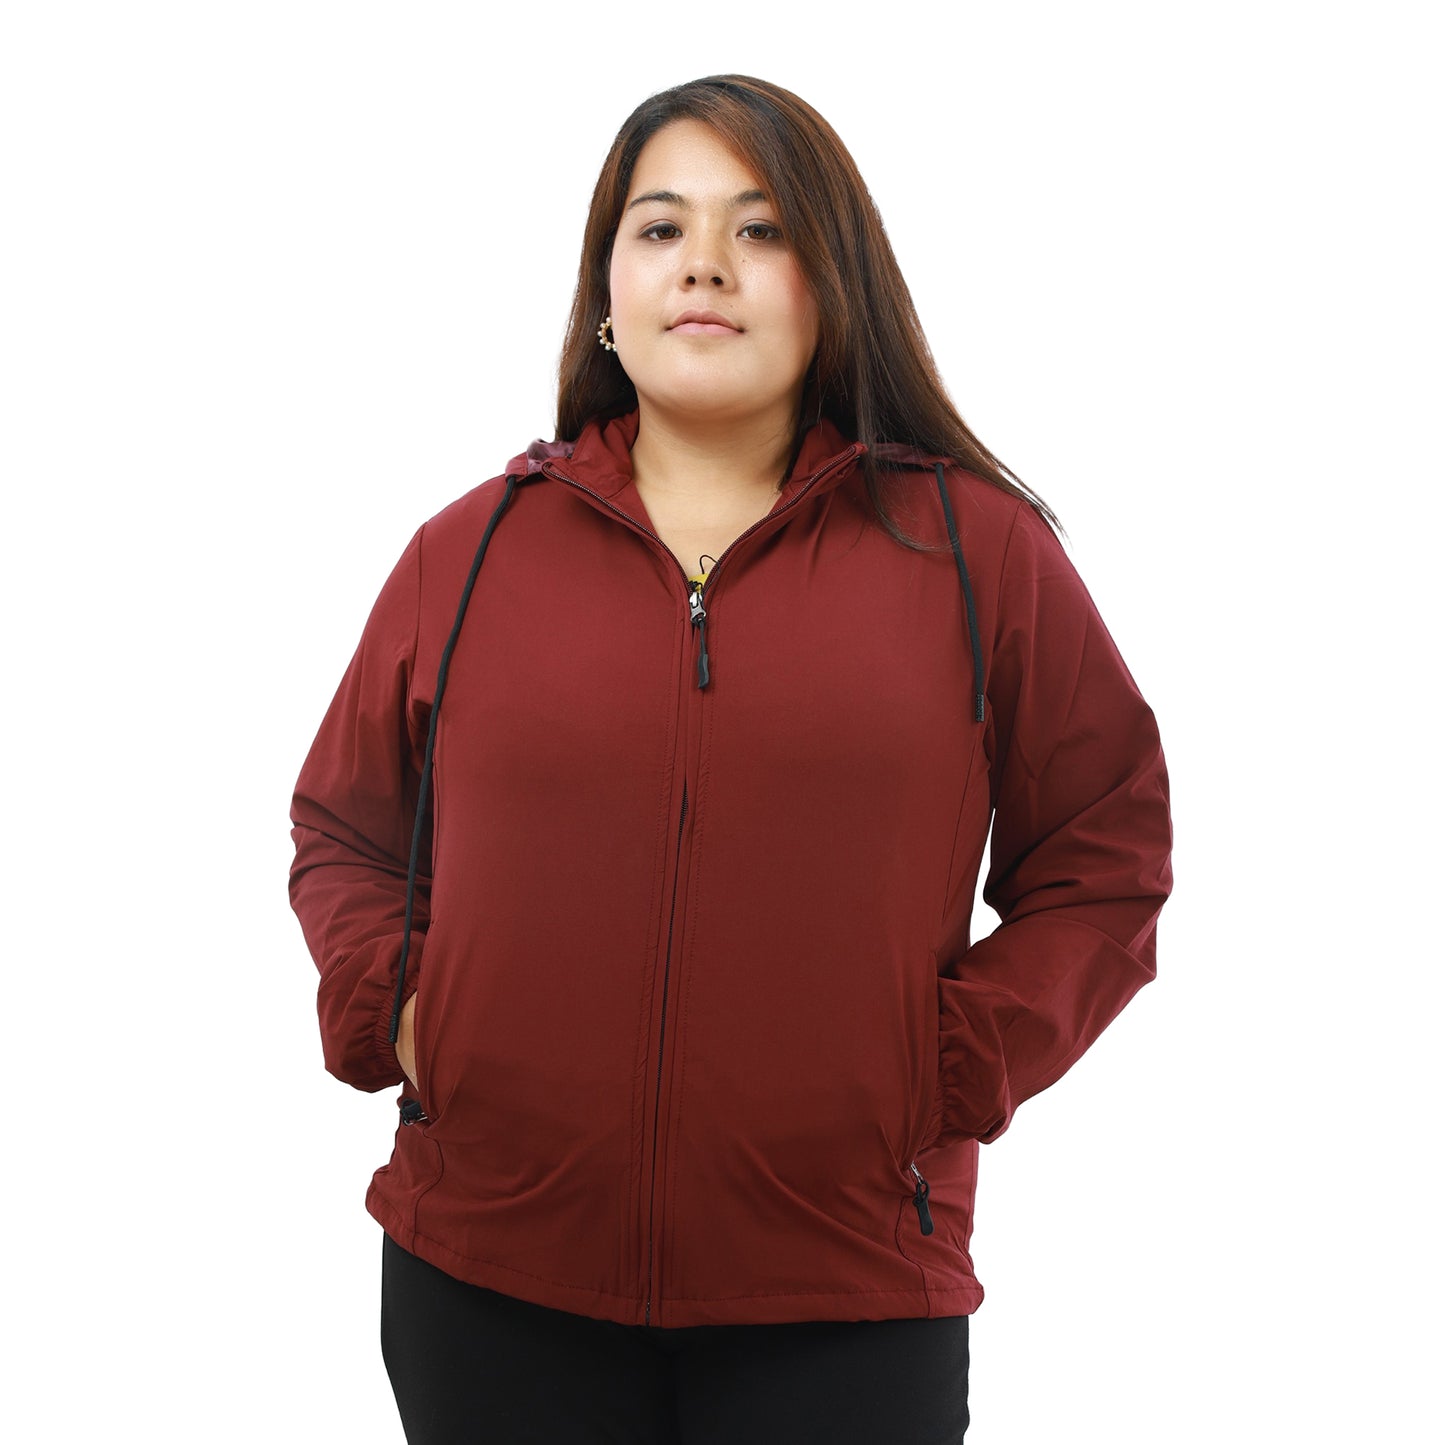 Lightweight Double Layered Windcheater with Detachable Cap (WC-100)